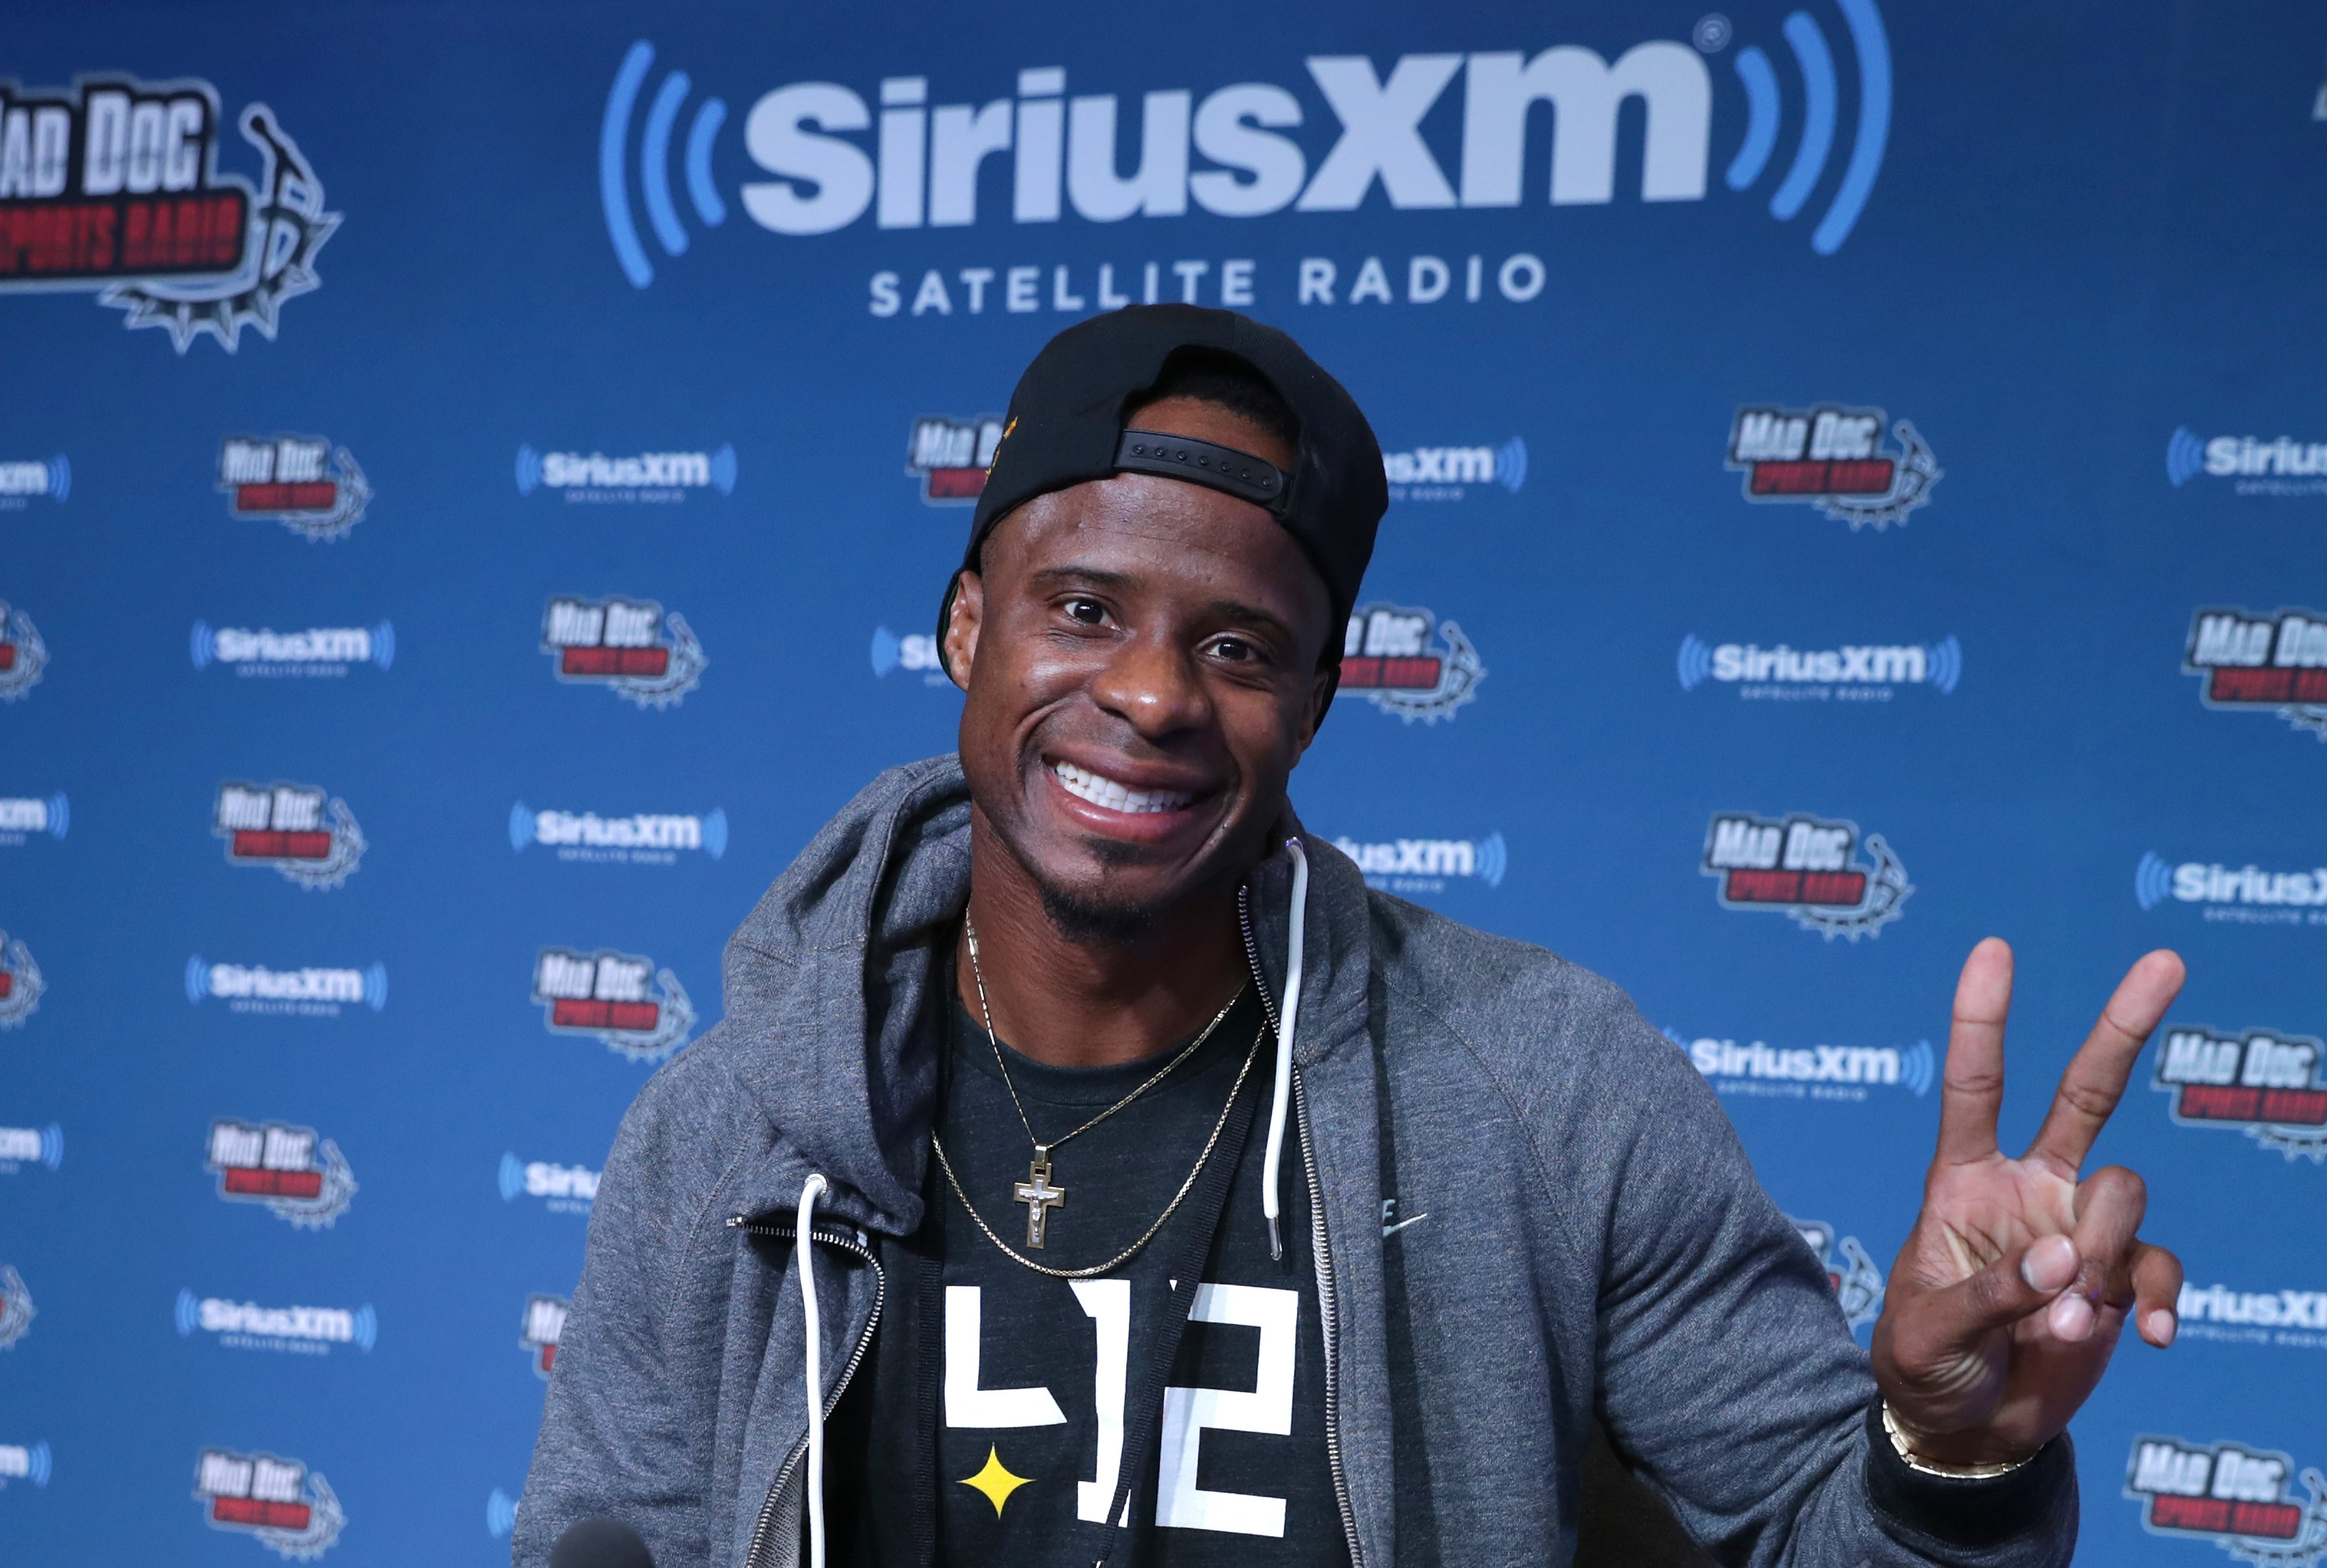 Former NFL player Ike Taylor visits the SiriusXM set at Super Bowl LI Radio Row at the George R. Brown Convention Center on February 3, 2017 in Houston, Texas. (Cindy Ord—Getty Images for SiriusXM)